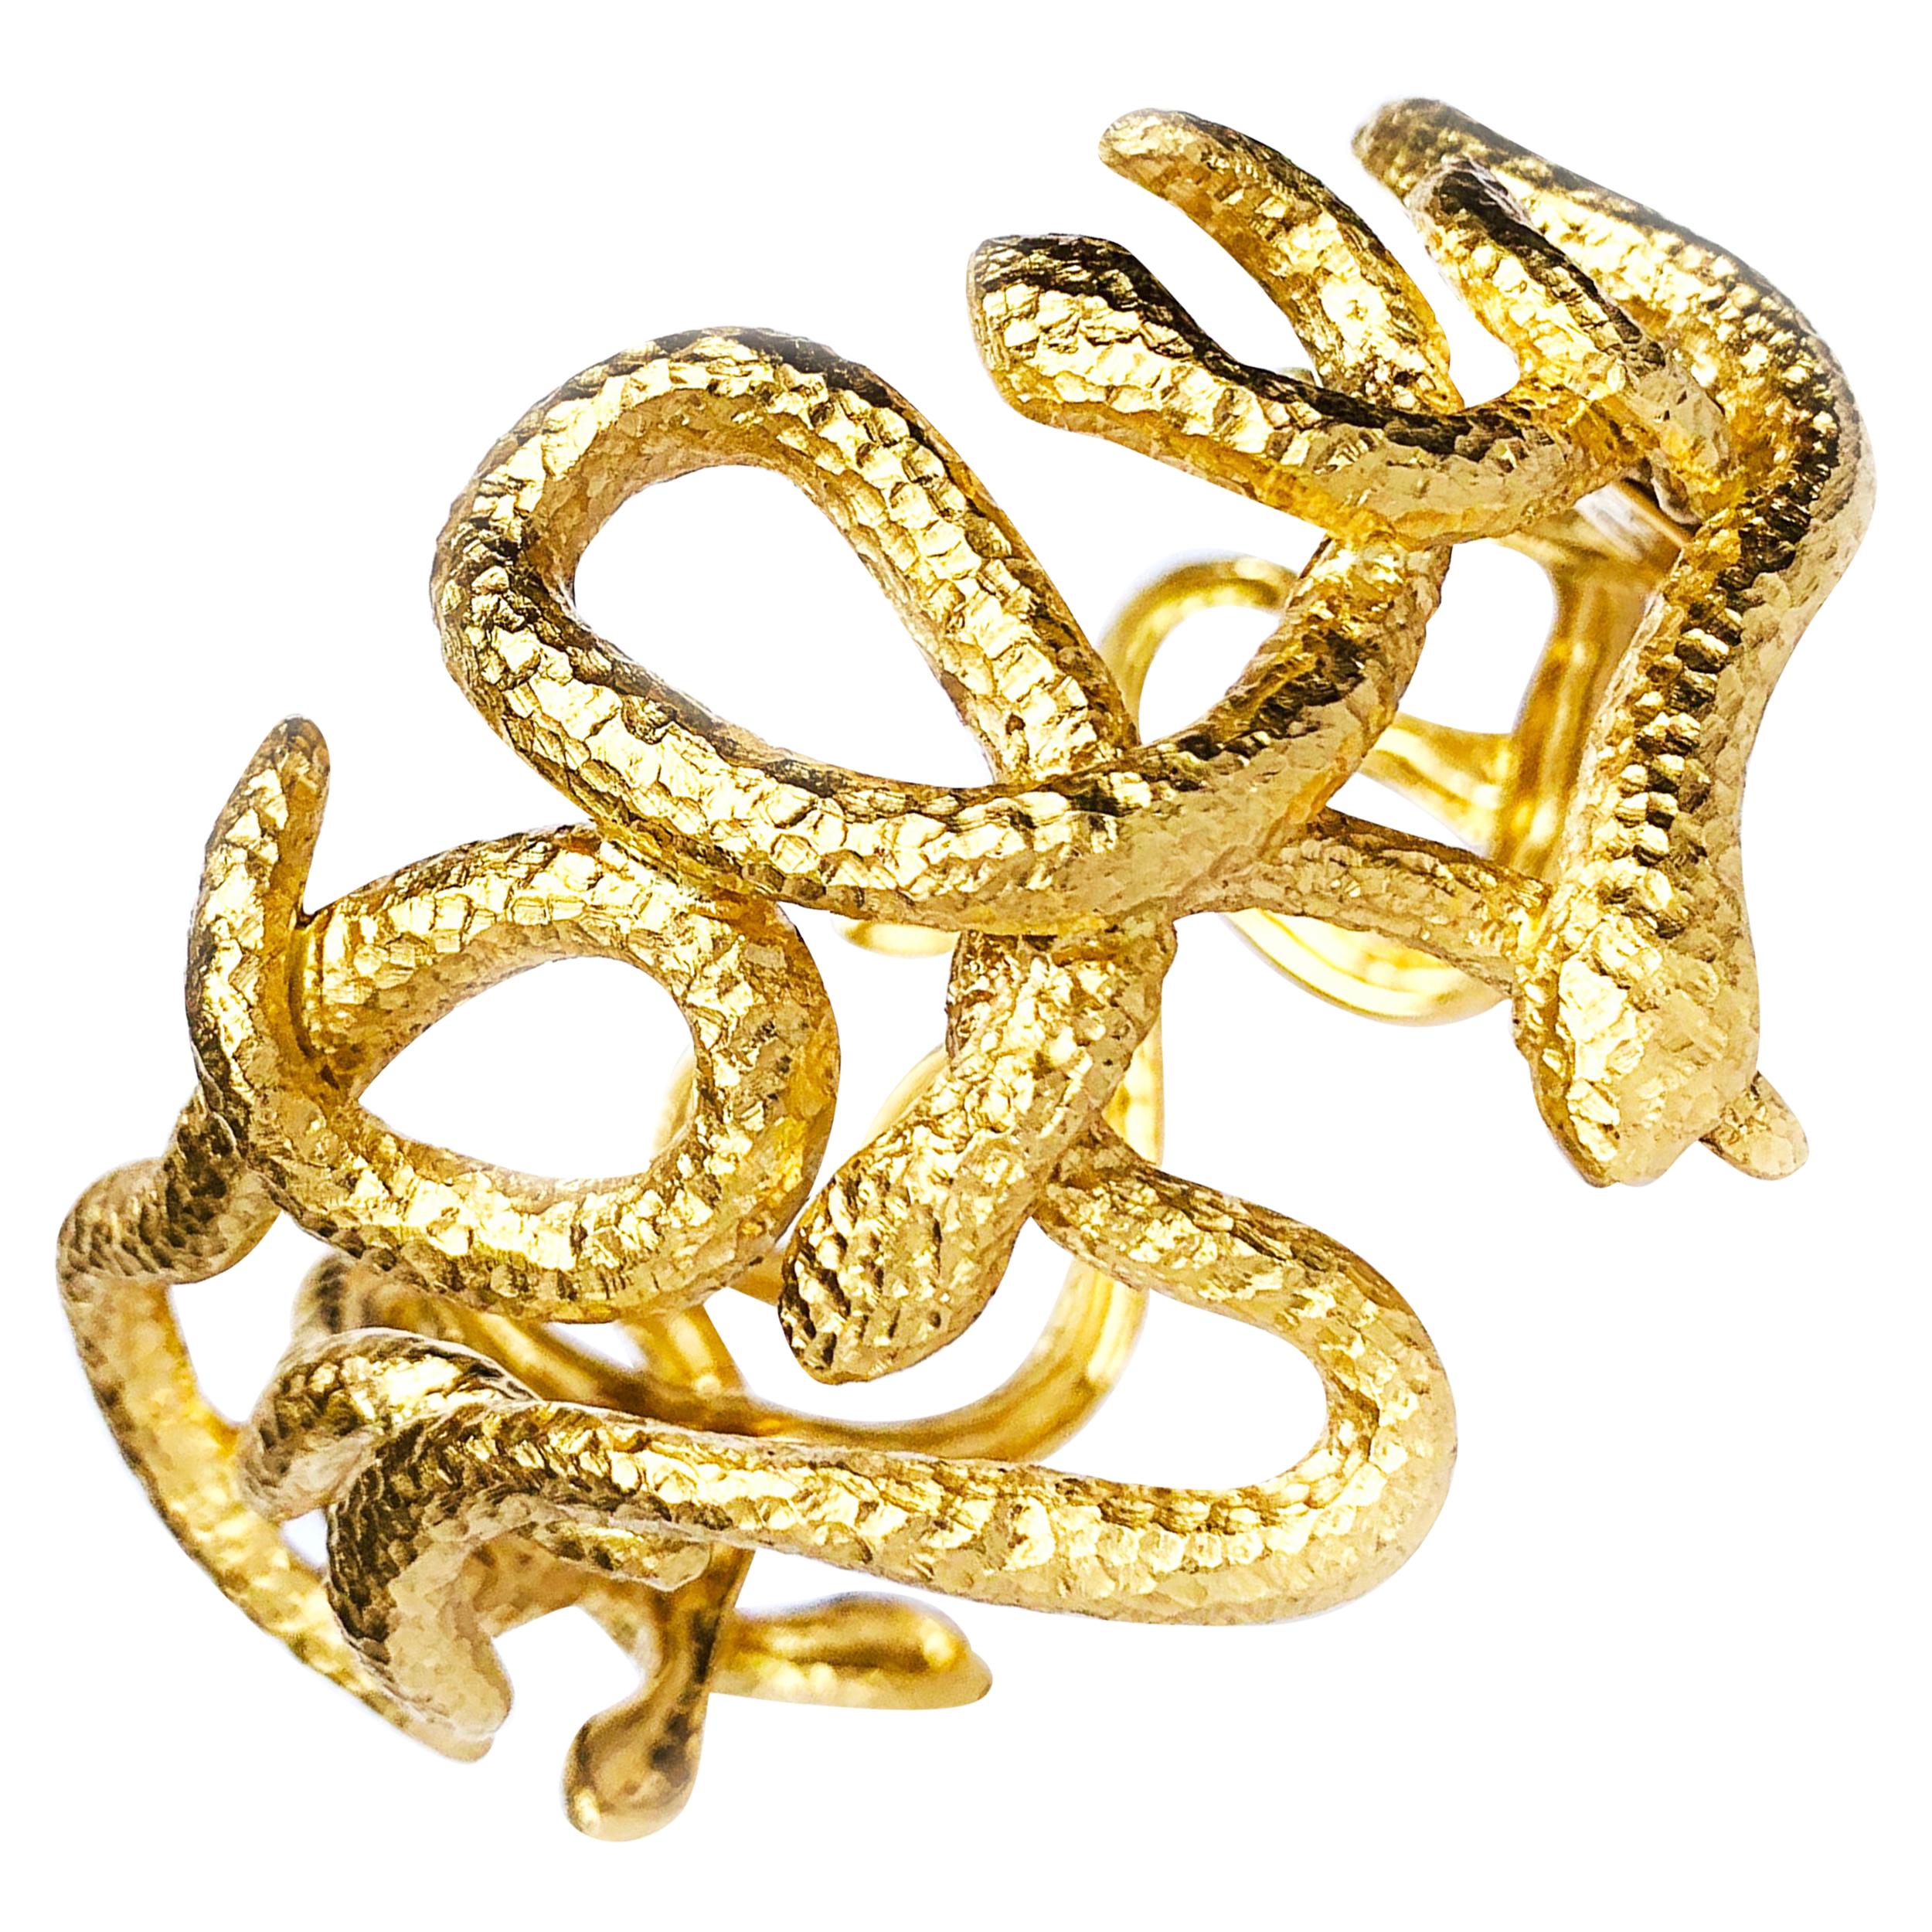 Contemporary Diamond Coiled Serpent Bracelet For Sale at 1stDibs